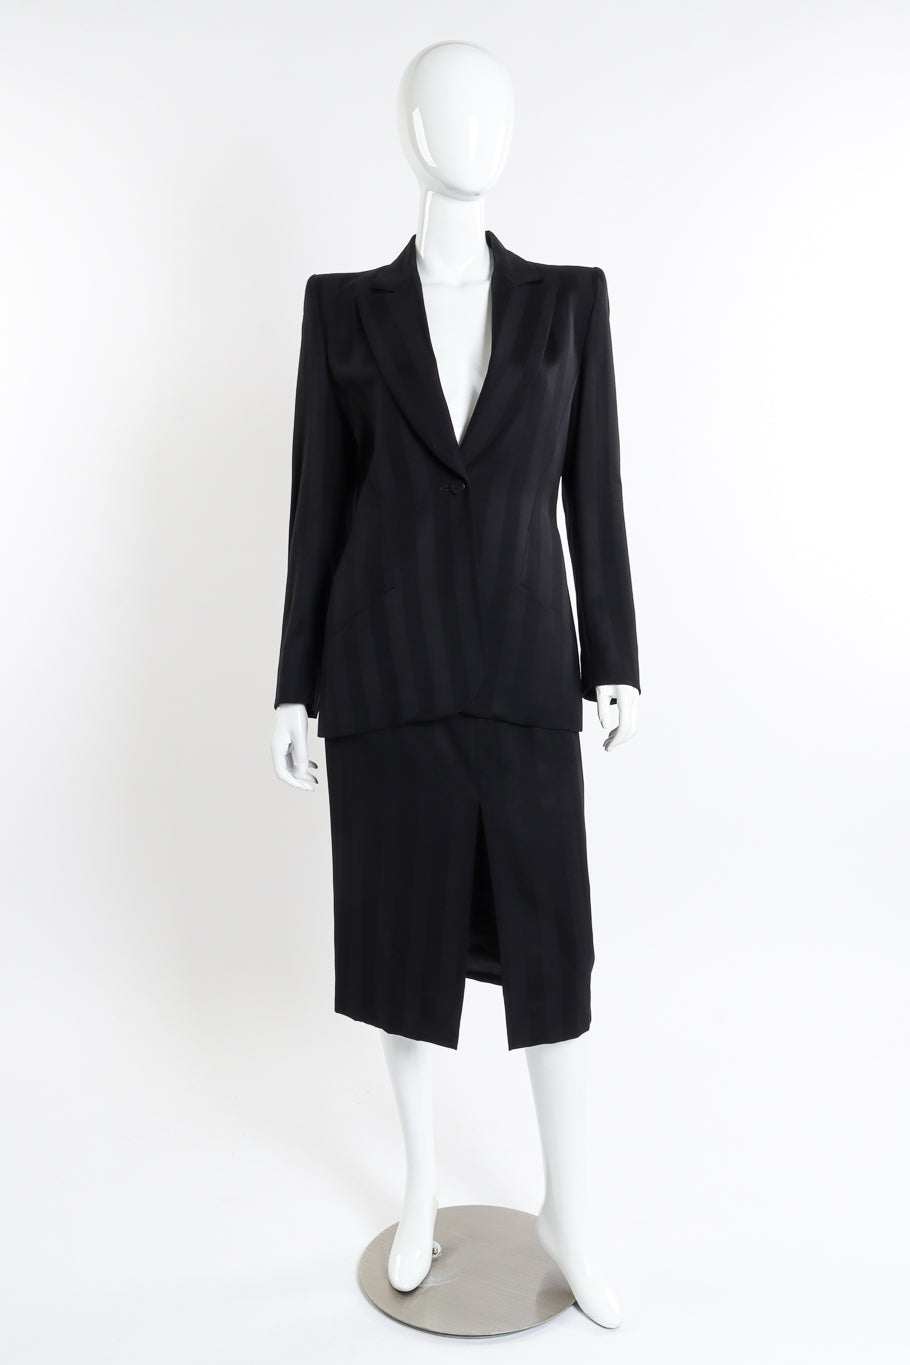 Vented Wool Stripe Blazer & Skirt Suit by Givenchy on mannequin @recessla